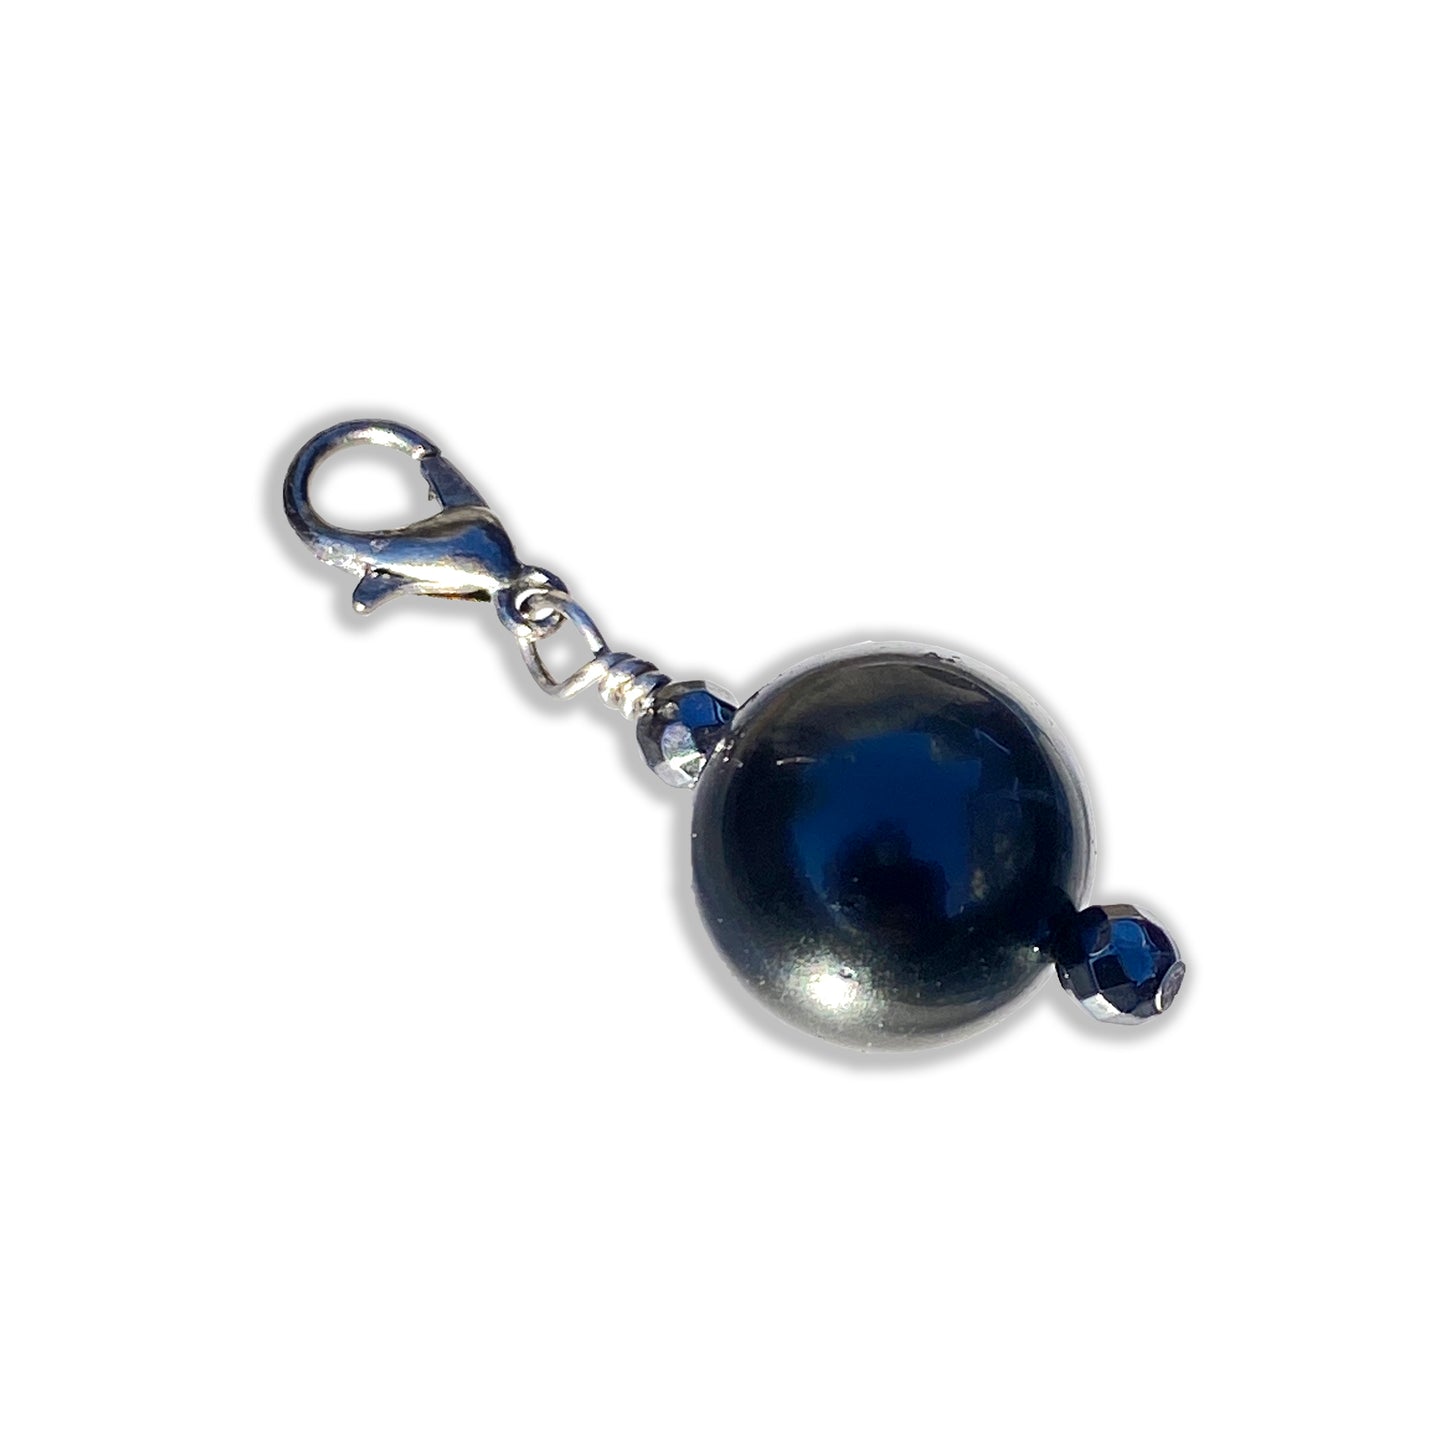 Gemstone and South Seashell Pearl Pet Collar Charm